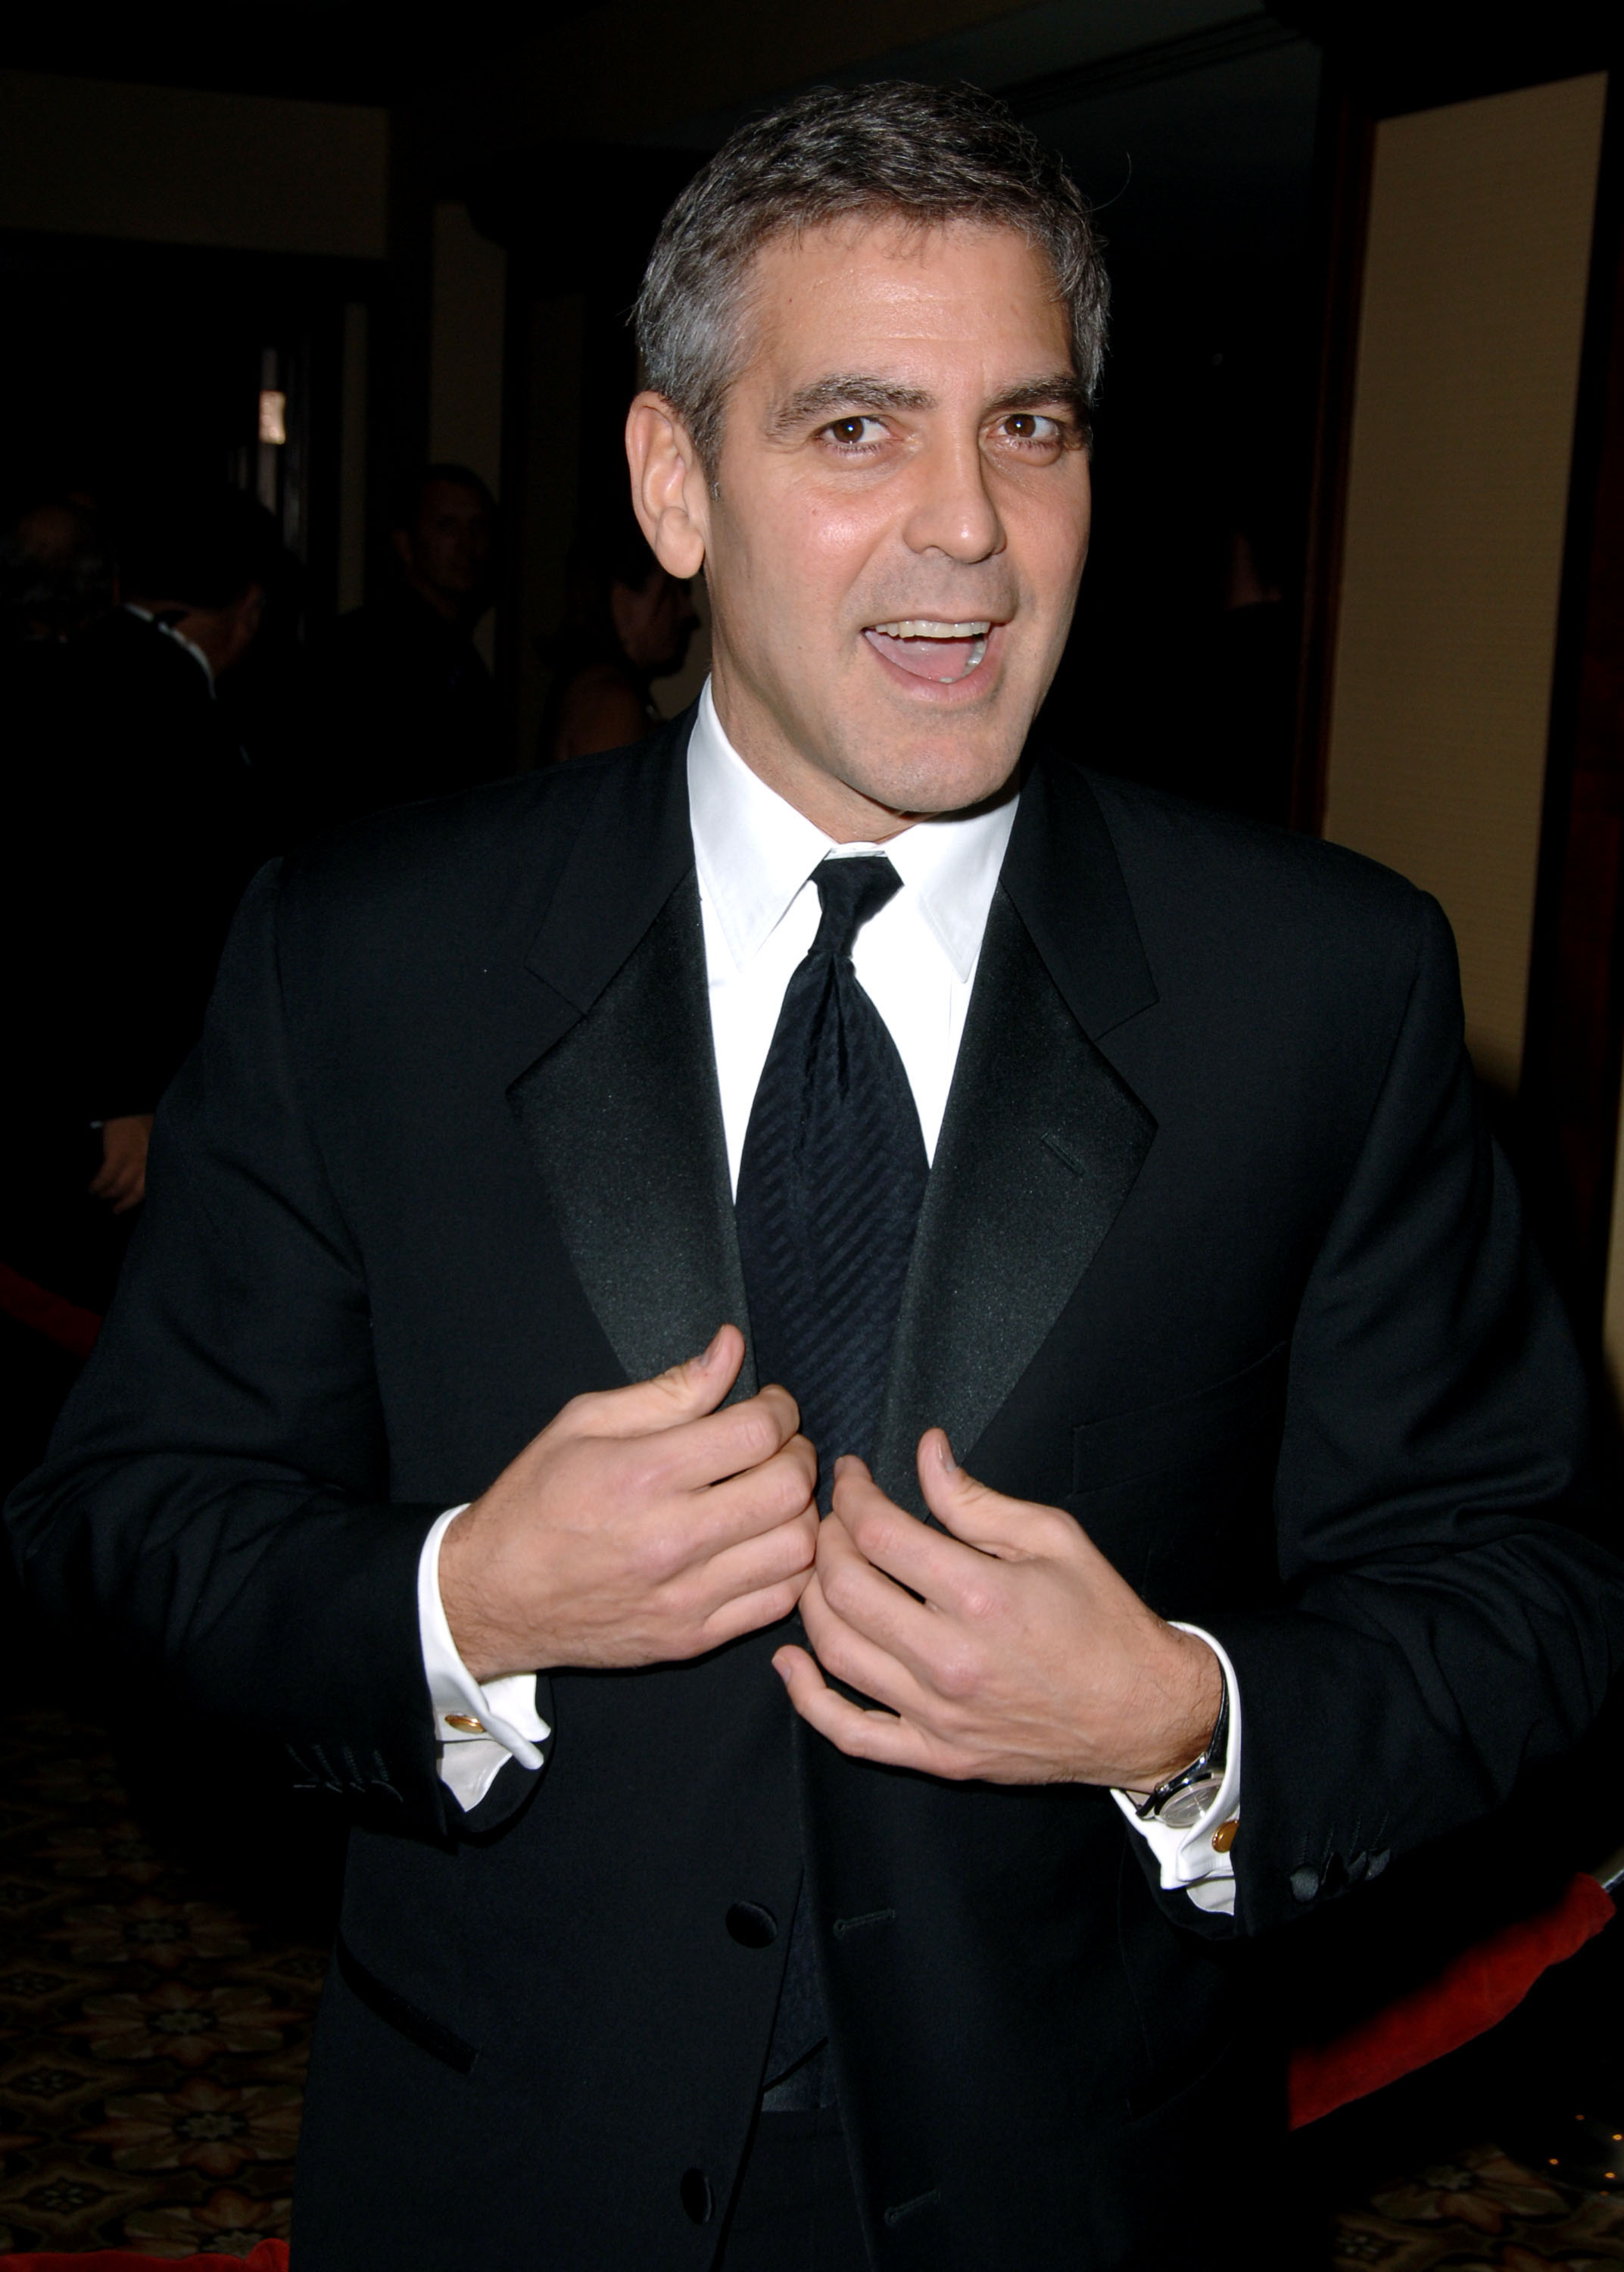 George Clooney bei den 58th Annual Directors Guild of America Awards in Century City, Kalifornien, 2006 | Quelle: Getty Images